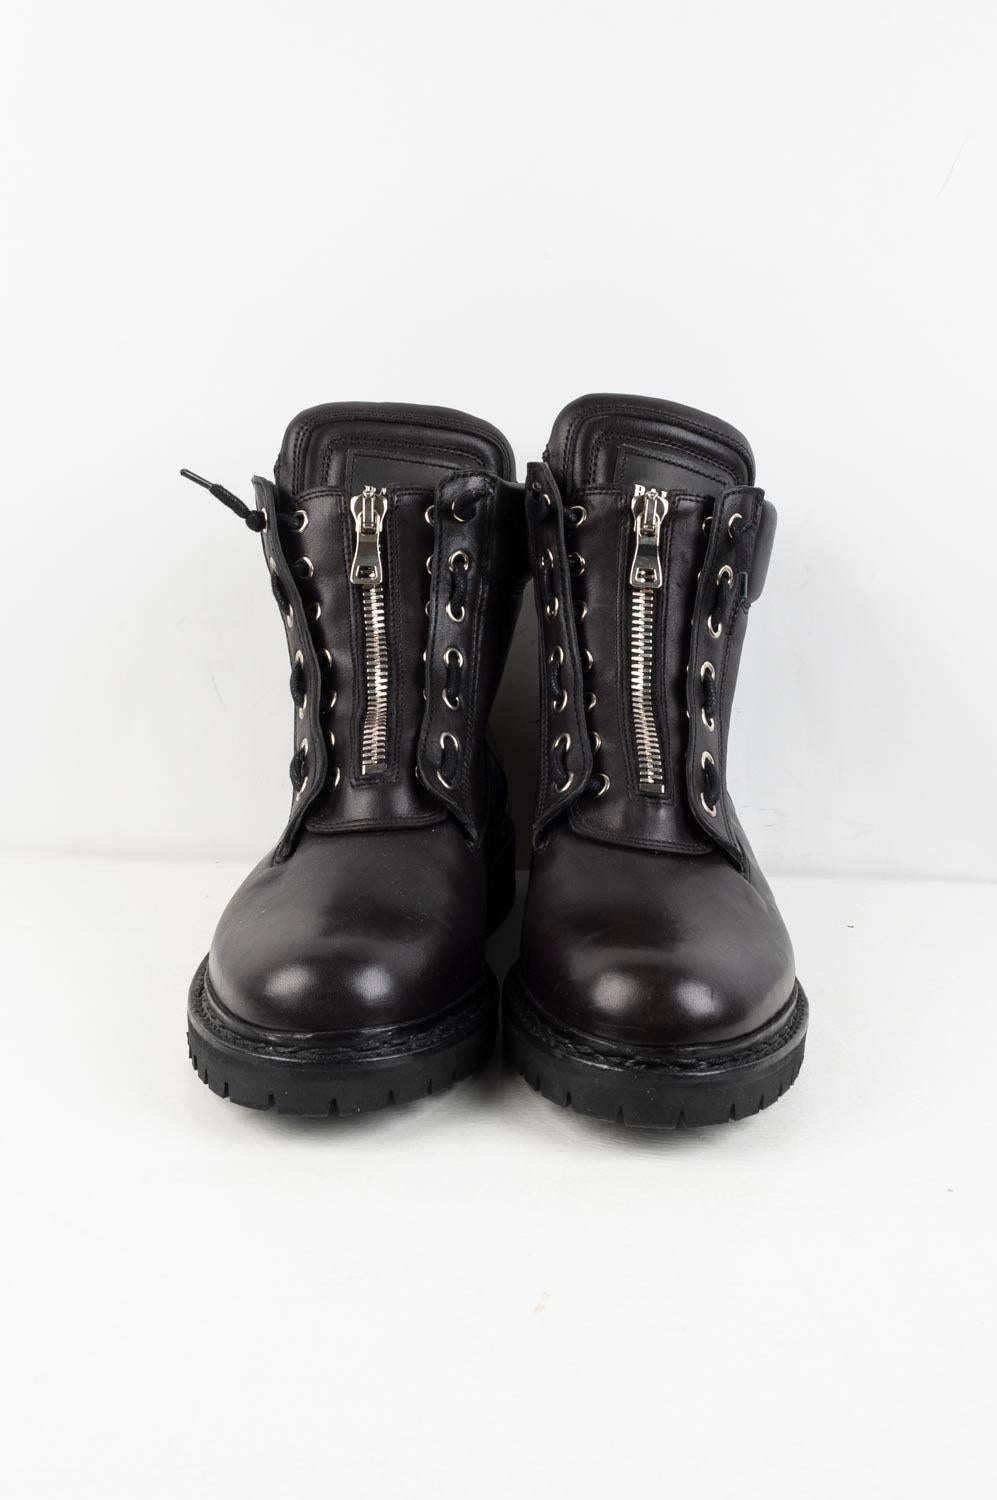 Item for sale is 100% genuine Balmain Boots Leather Men Shoes, S316
Color: Black
(An actual color may a bit vary due to individual computer screen interpretation)
Material: Leather
Tag size: 40 EUR
These shoes are great quality item. Rate 9 of 10,